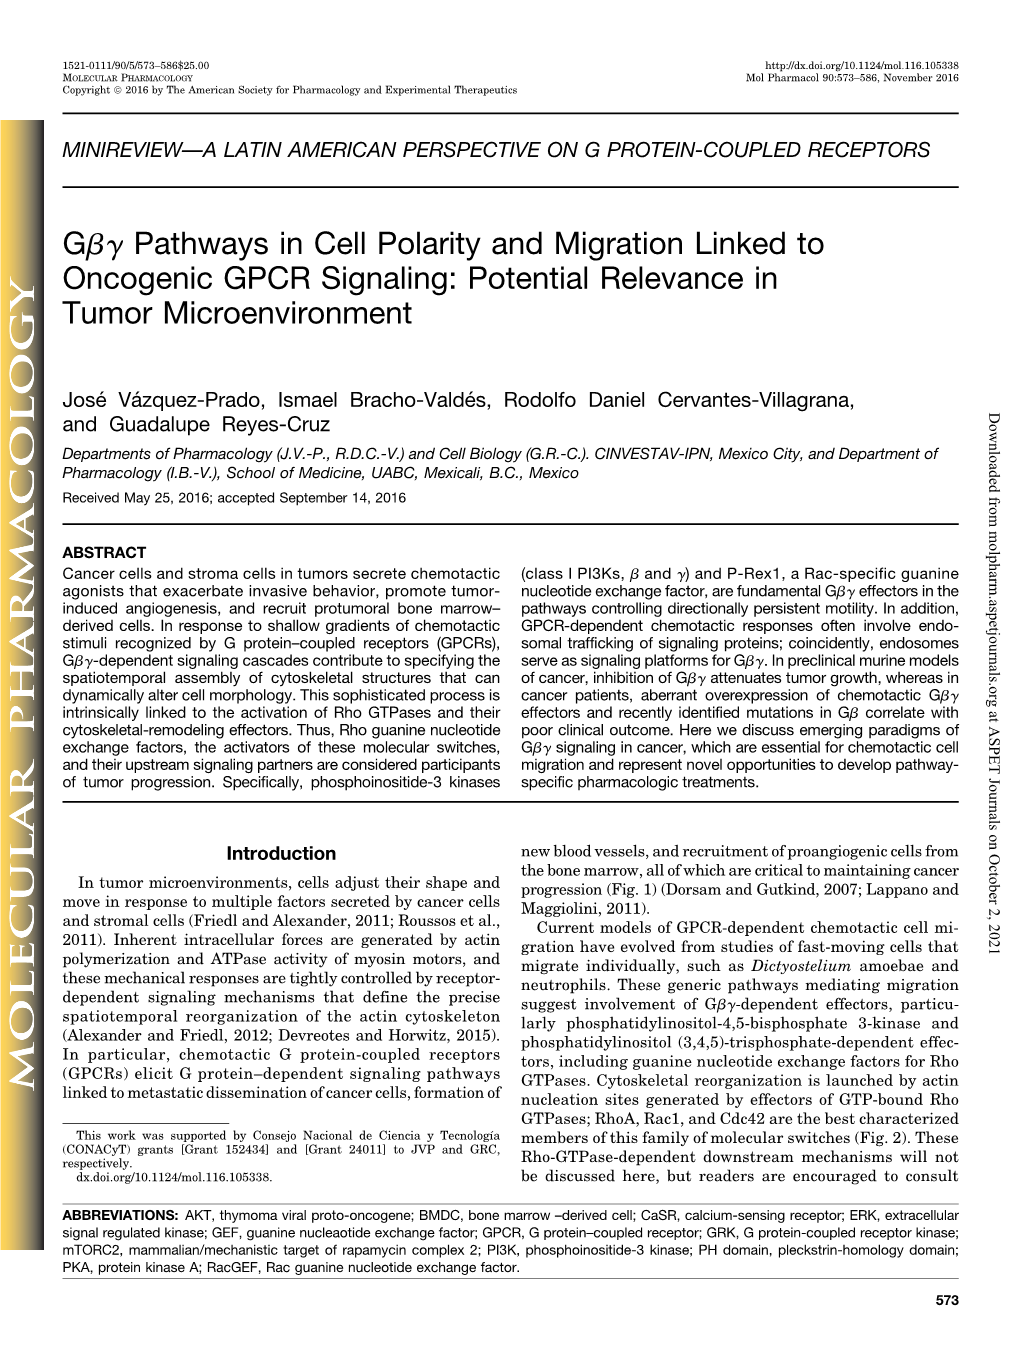 Gβγ Pathways in Cell Polarity and Migration Linked to Oncogenic